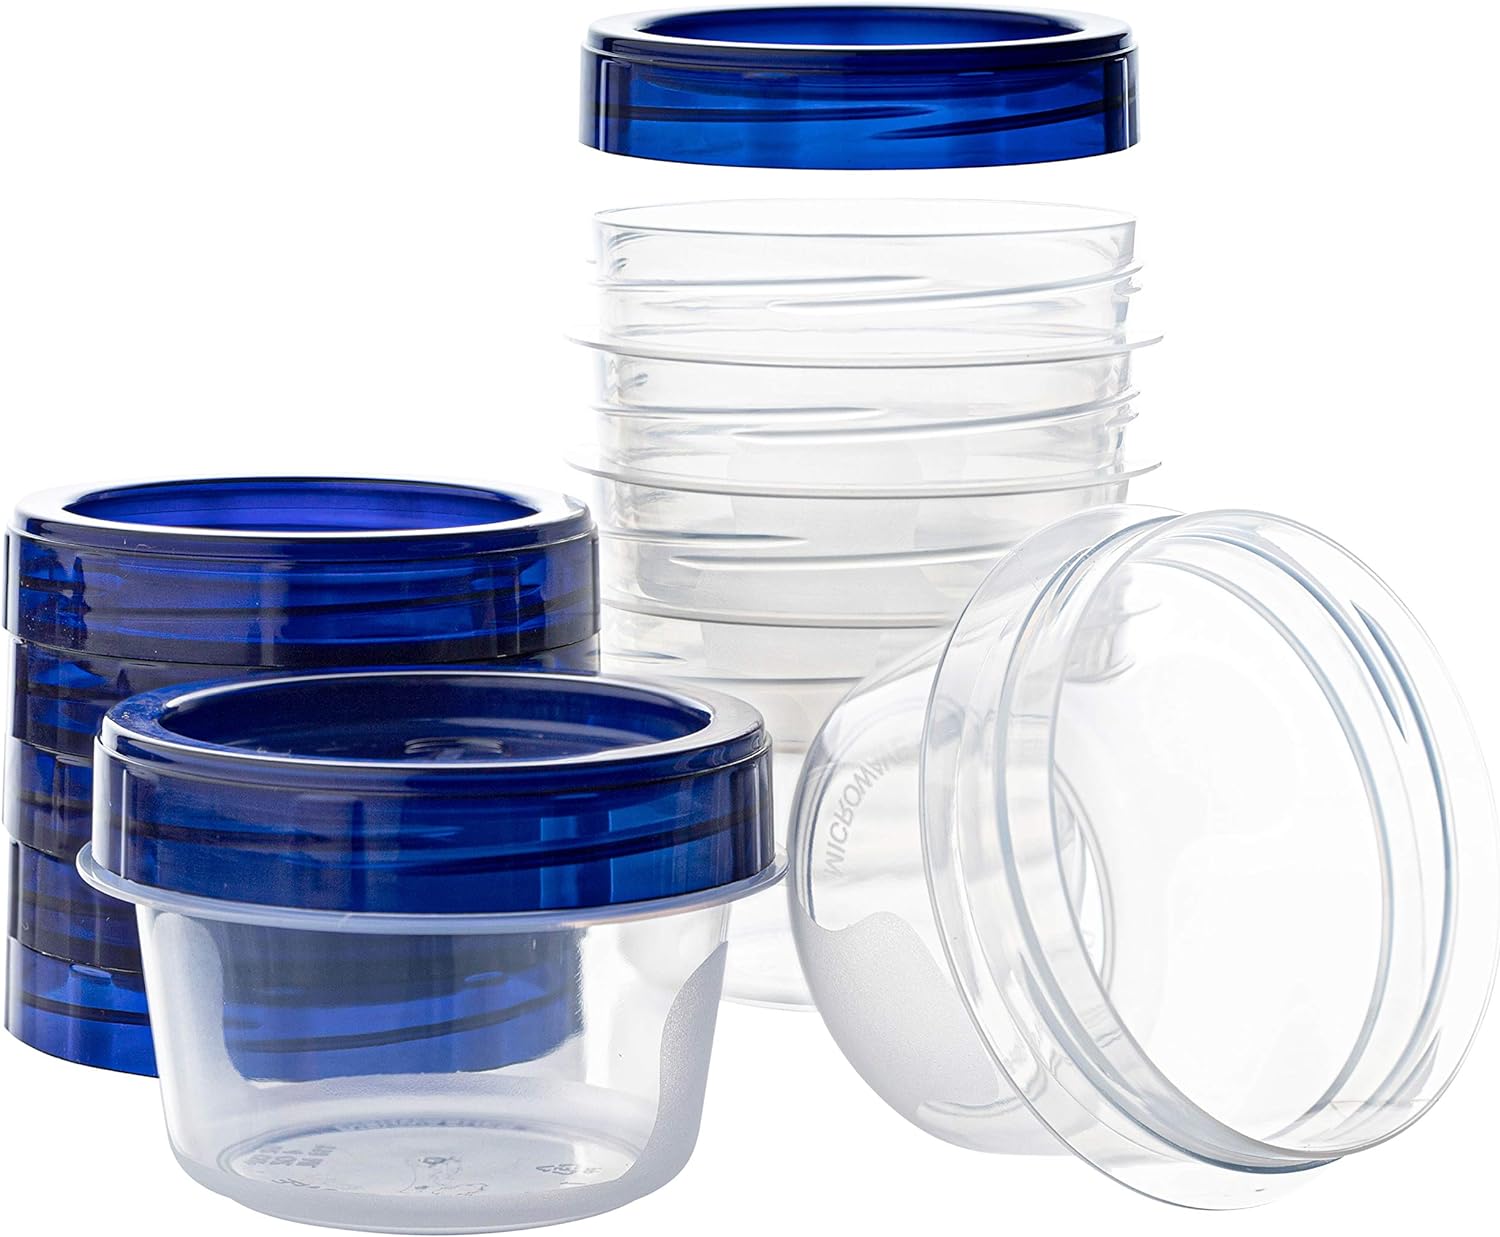 PLASTICPRO Deli Containers Clear bottom With blue Top Twist on Lids Reusable, Stackable, Food Storage Freezer Container (6, 4 OUNCE)